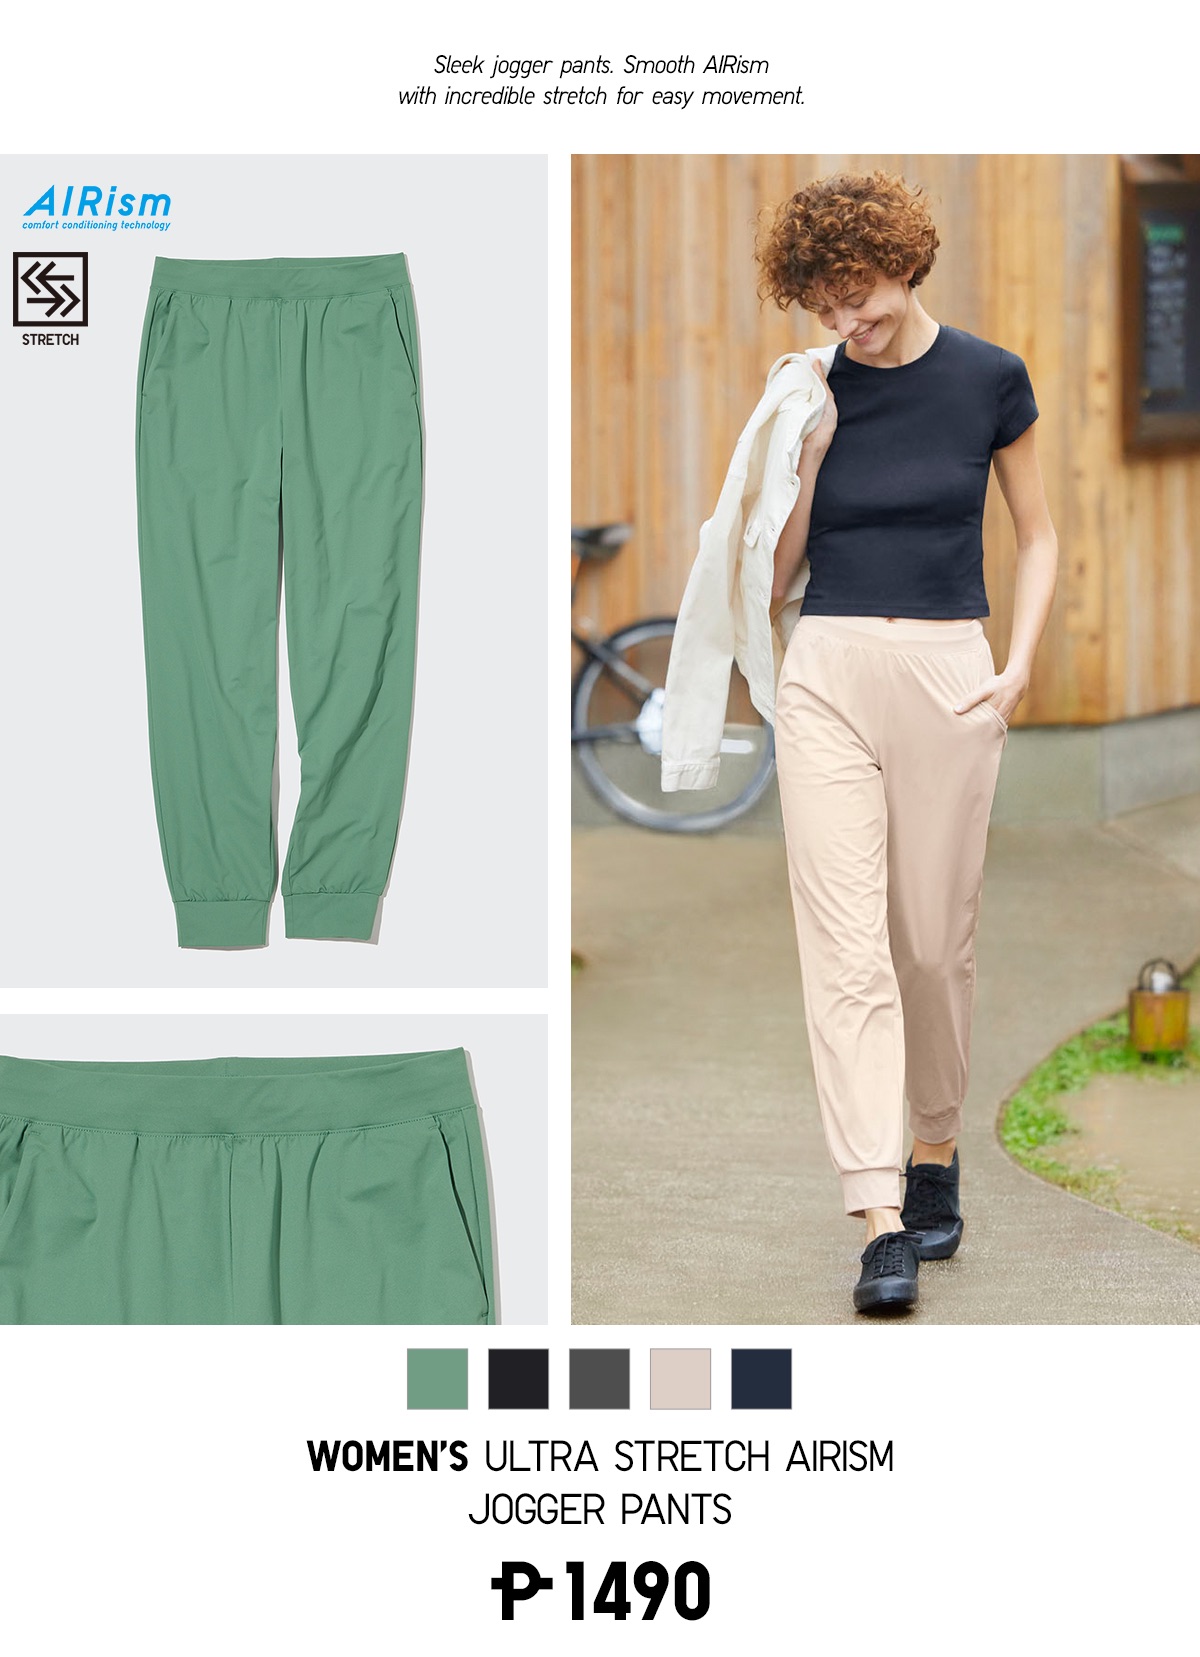 Hey, meet the Ultra Stretch Active Jogger Pants for sports or everyday wear  - Uniqlo USA